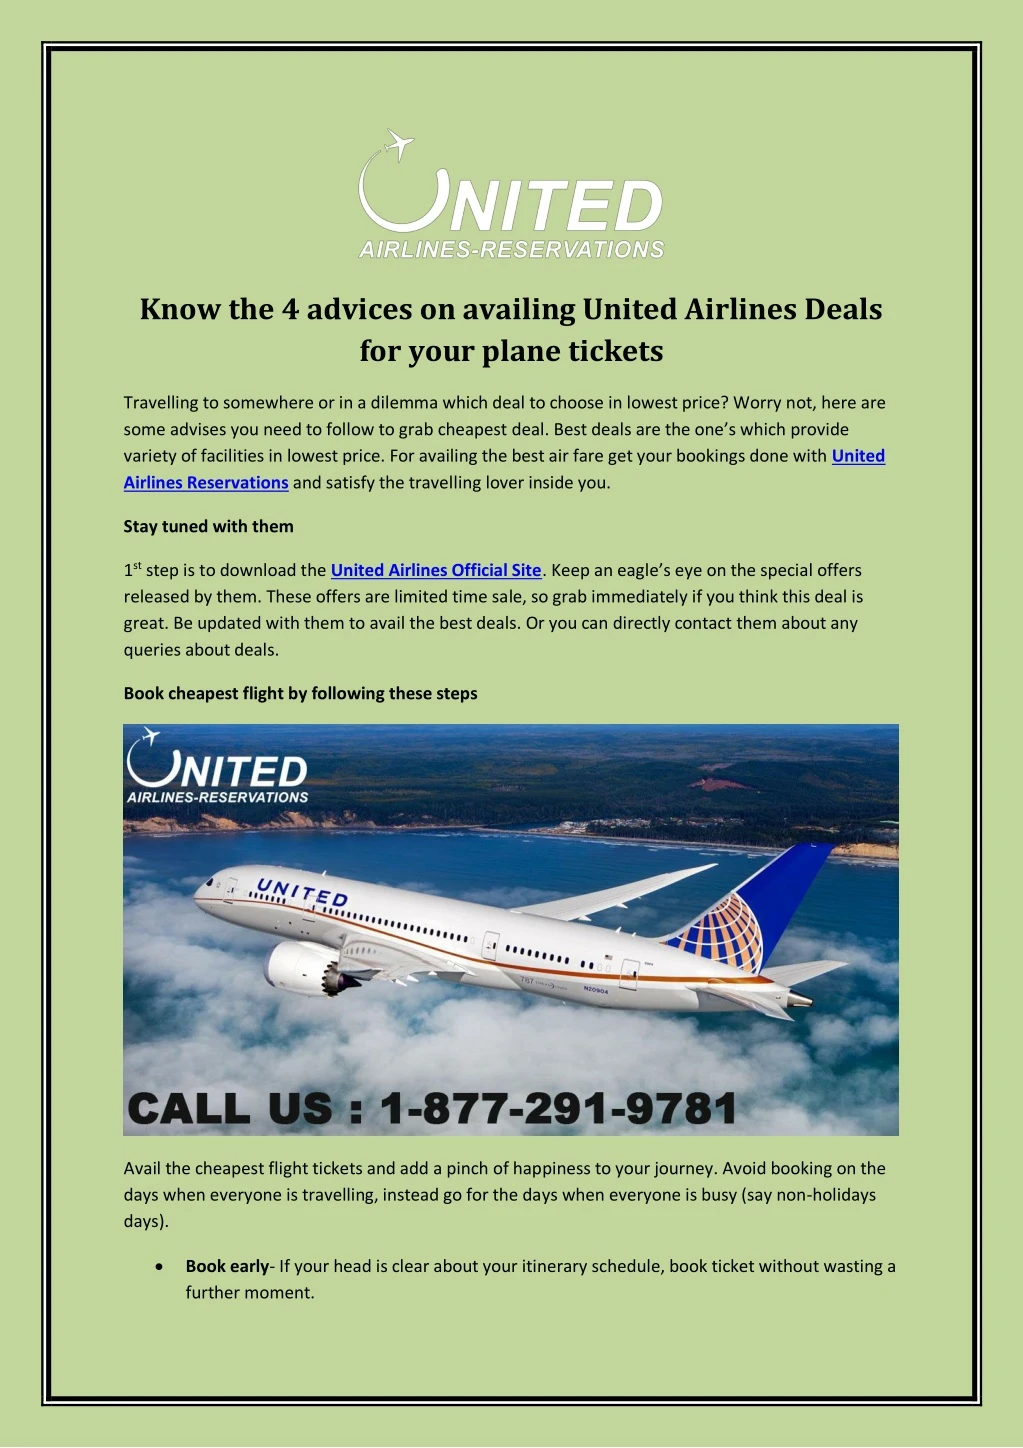 know the 4 advices on availing united airlines